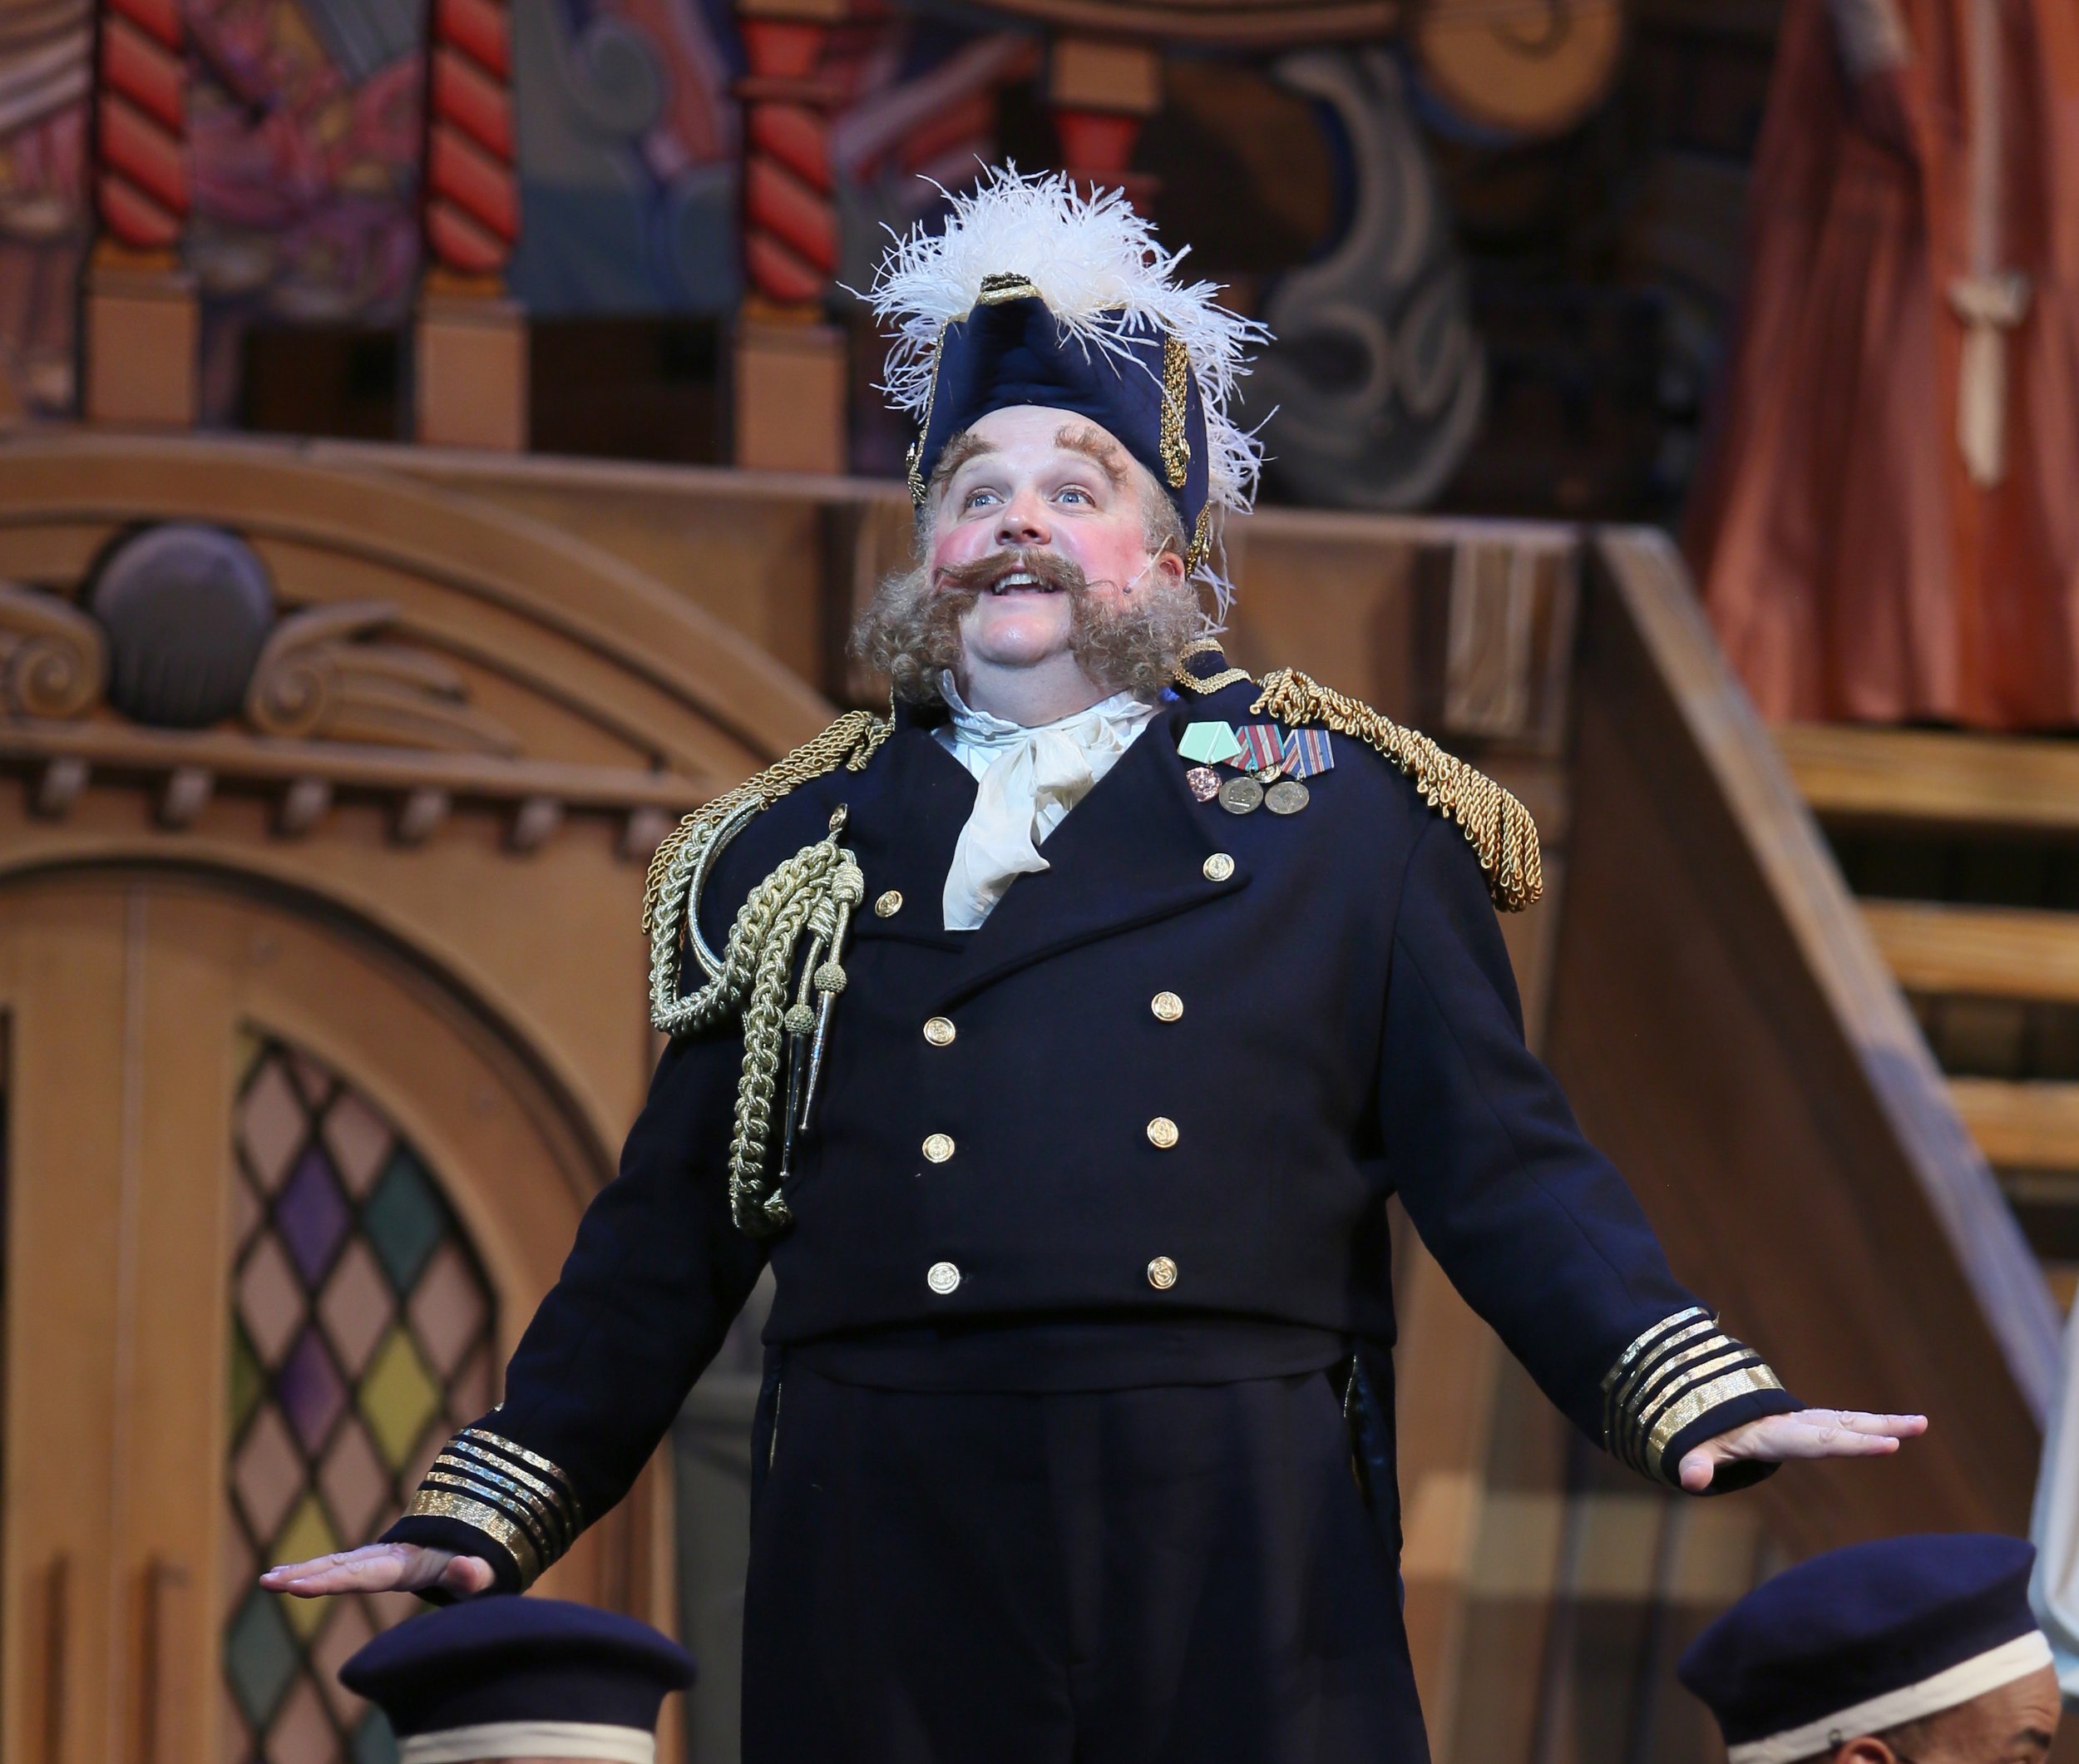  “His way with the authentic G&amp;S material was impeccable.” - David Gordon Duke, Vancouver Sun 